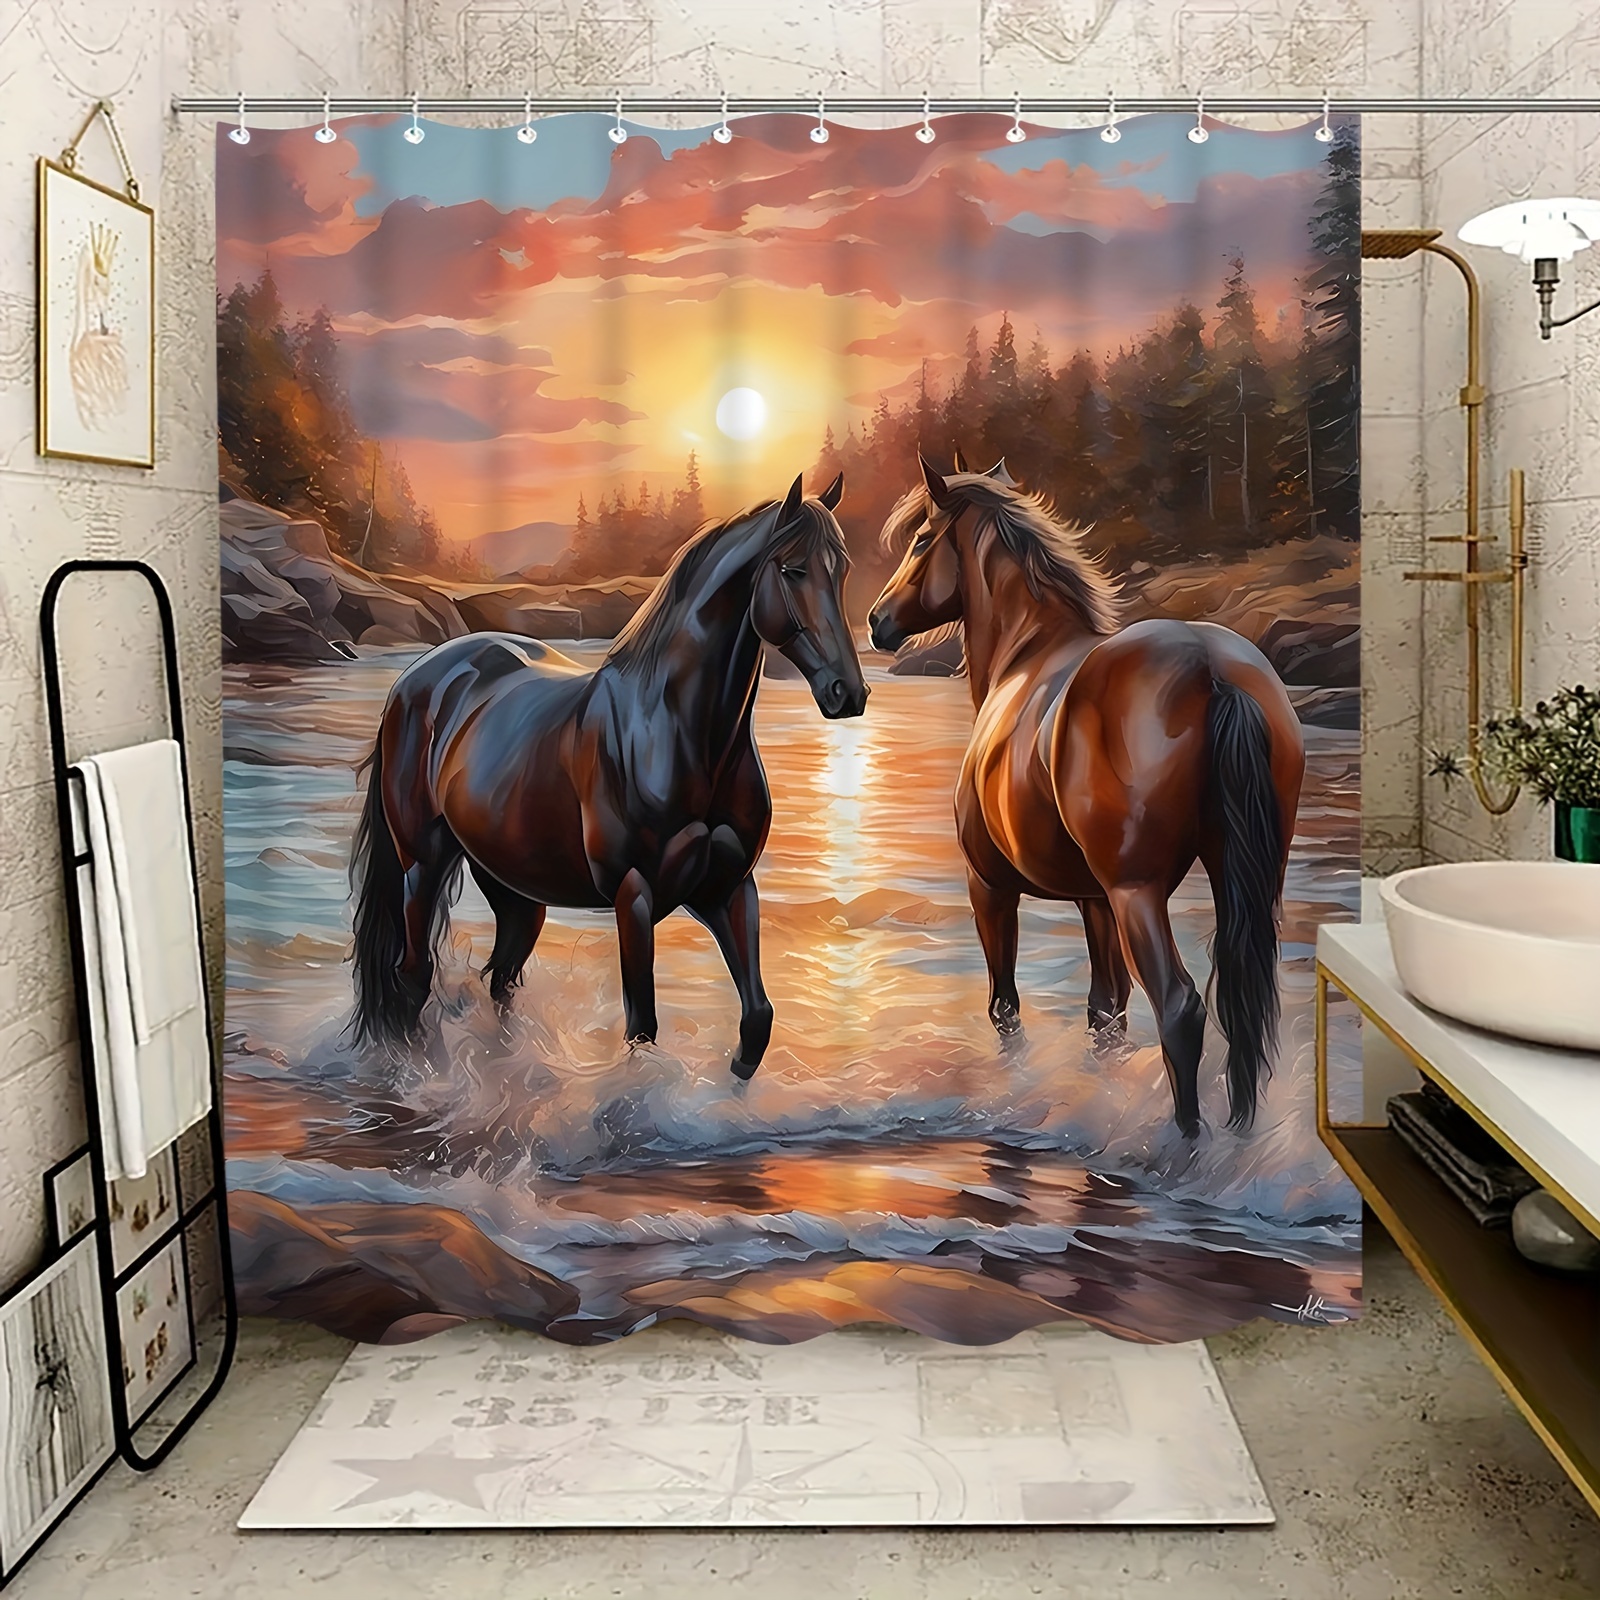 

2 Horses Pattern Shower Curtain: Hand Wash Only, Animal Print, Waterproof, Knit Fabric, No Lining, Suitable For All Seasons